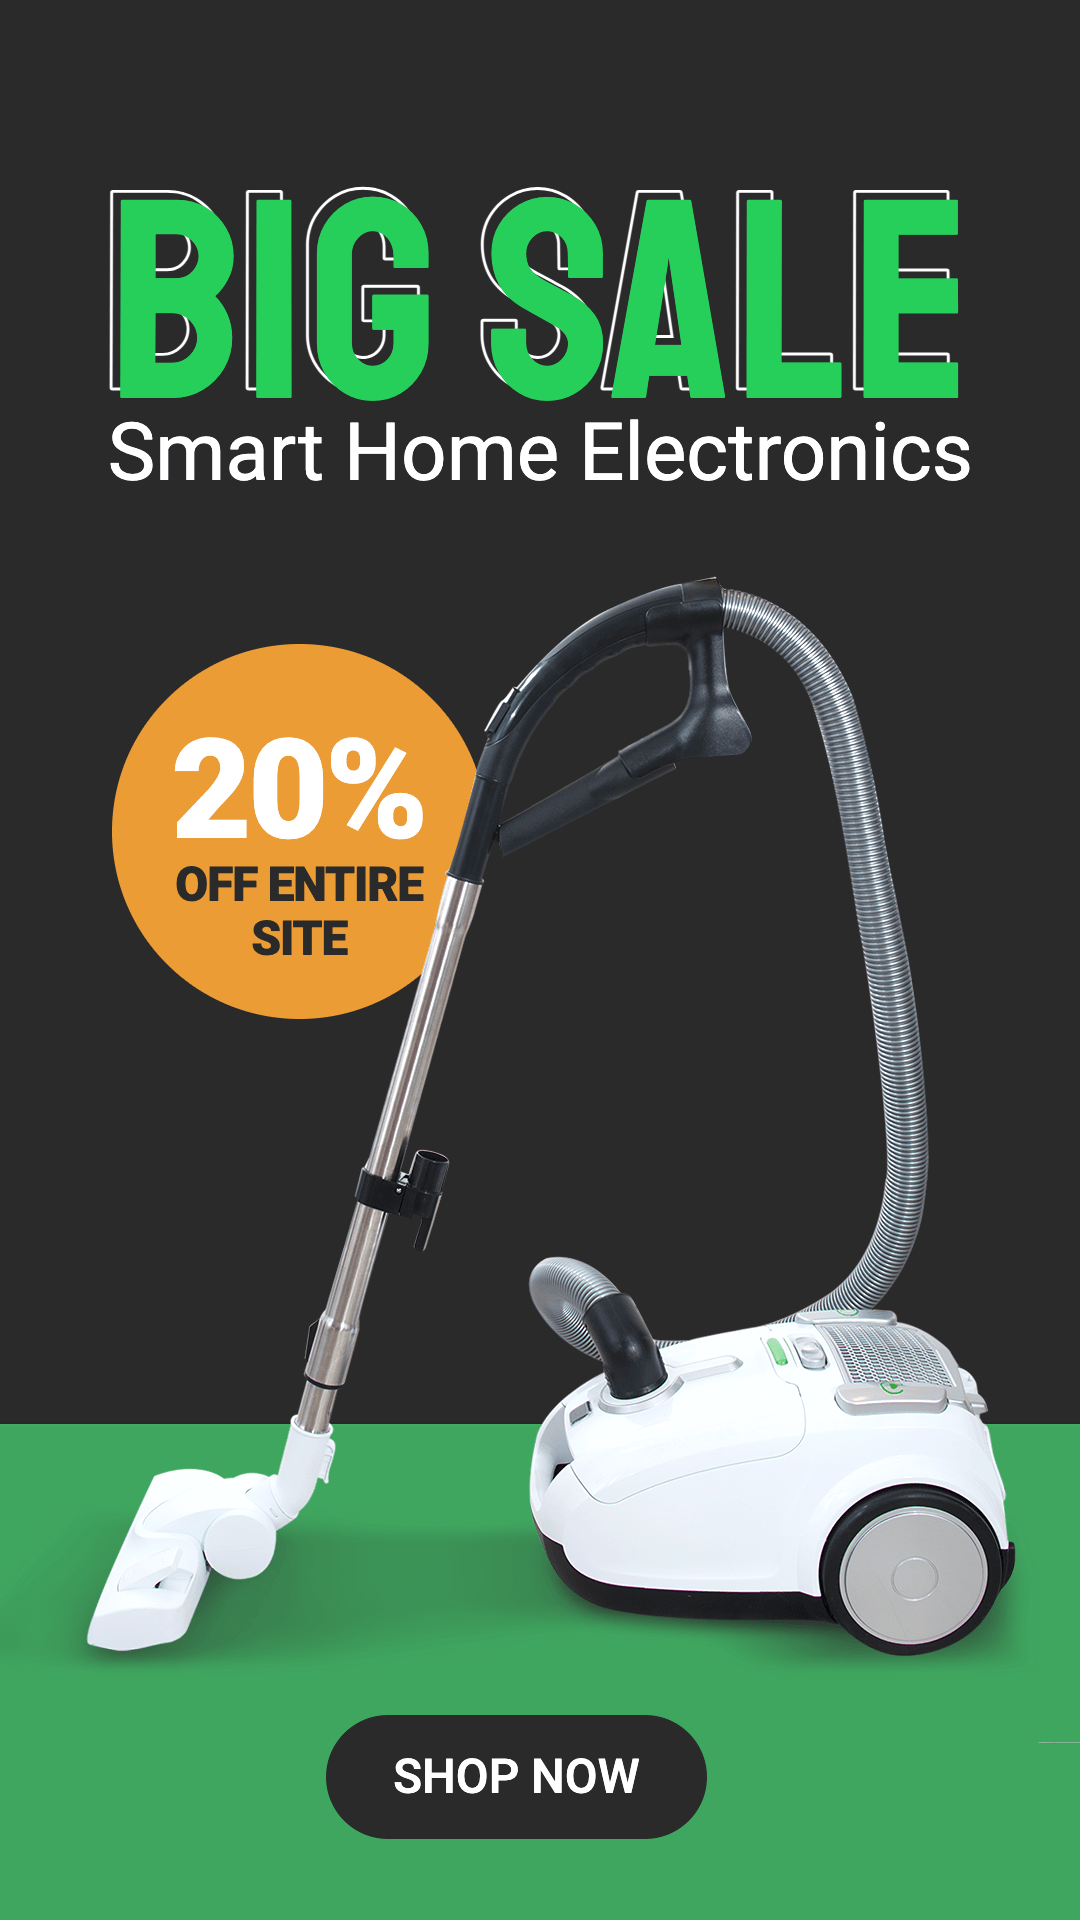 Dust Cleaner Home Electronic Appliance Discount Sale Promo Ecommerce Story预览效果